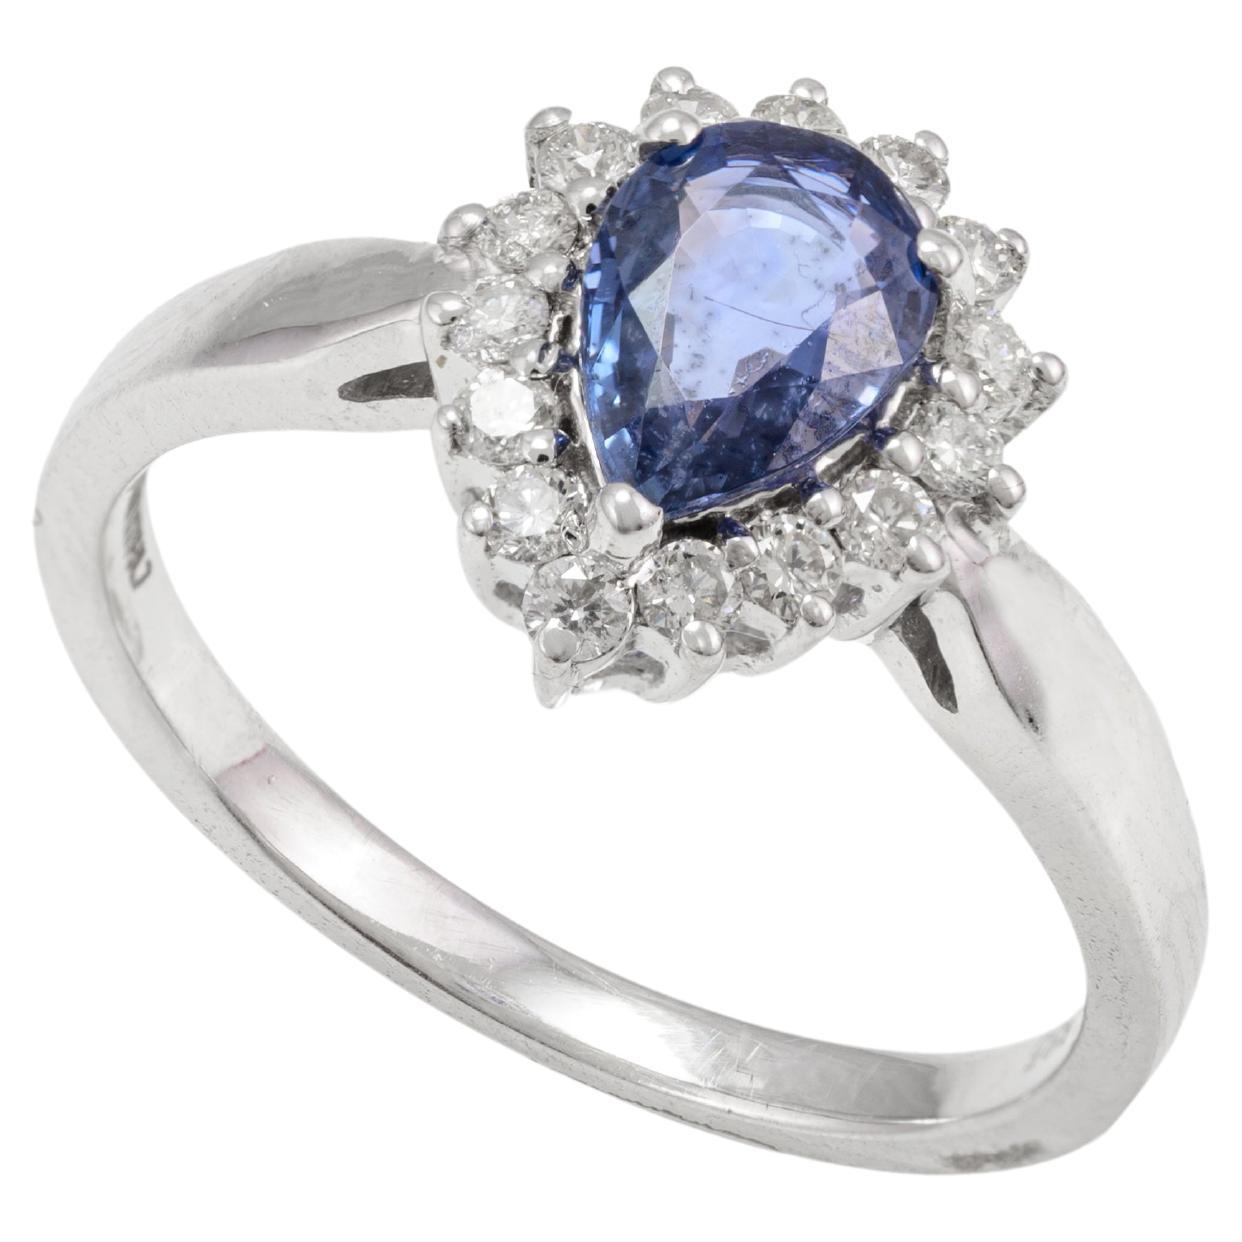 0.77 Carat Pear Cut Blue Sapphire and Diamond Halo Ring 14k Solid White Gold